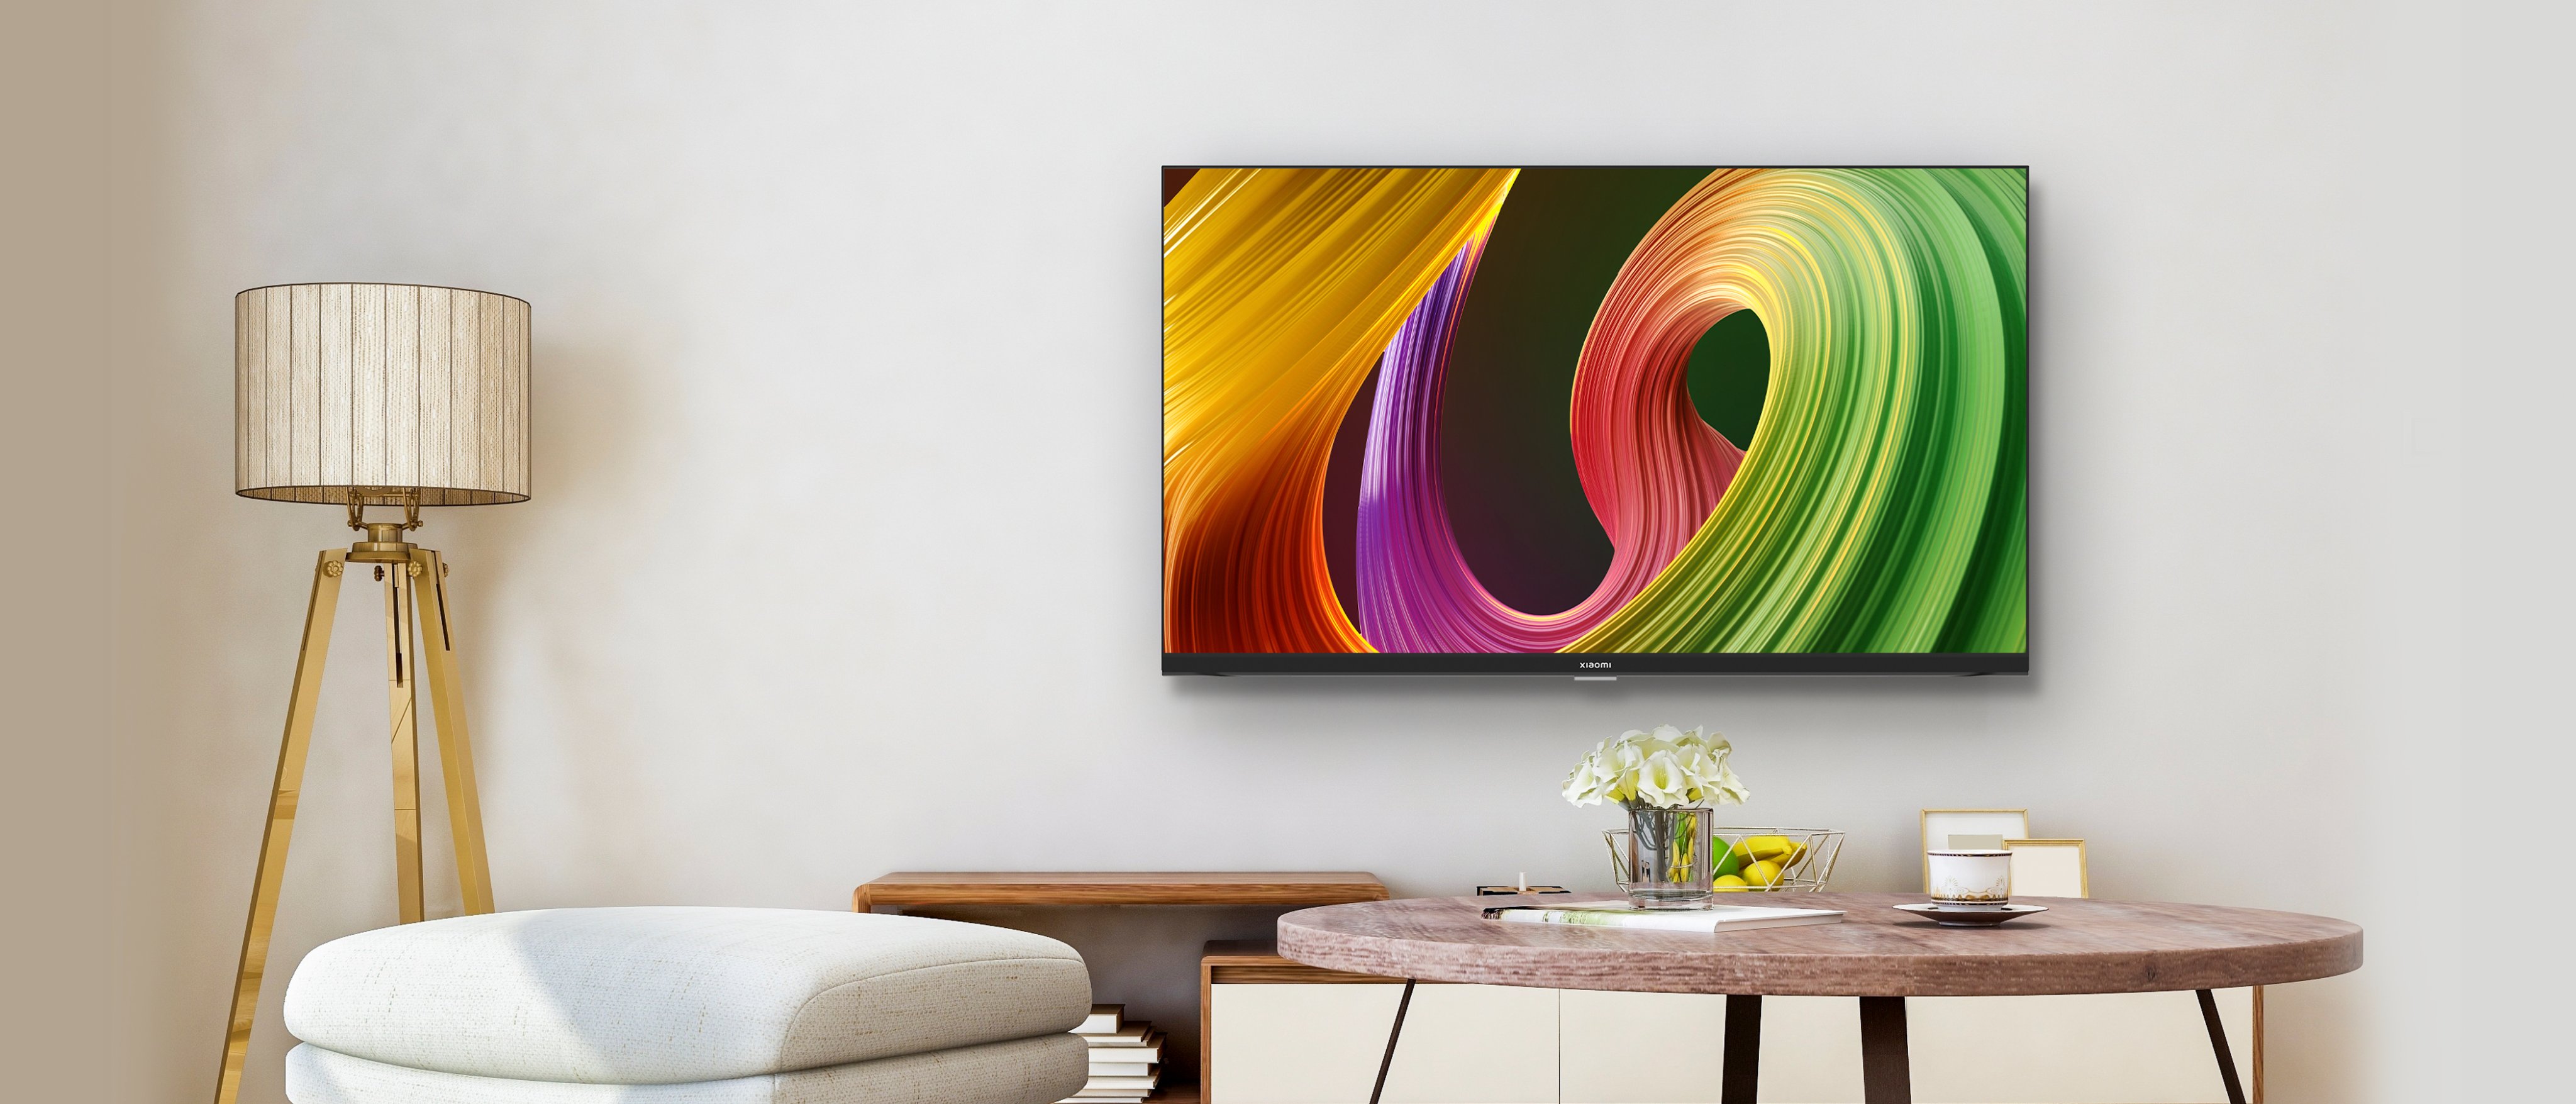 Xiaomi introduced budget Smart TVs 5A in three sizes starting at $200